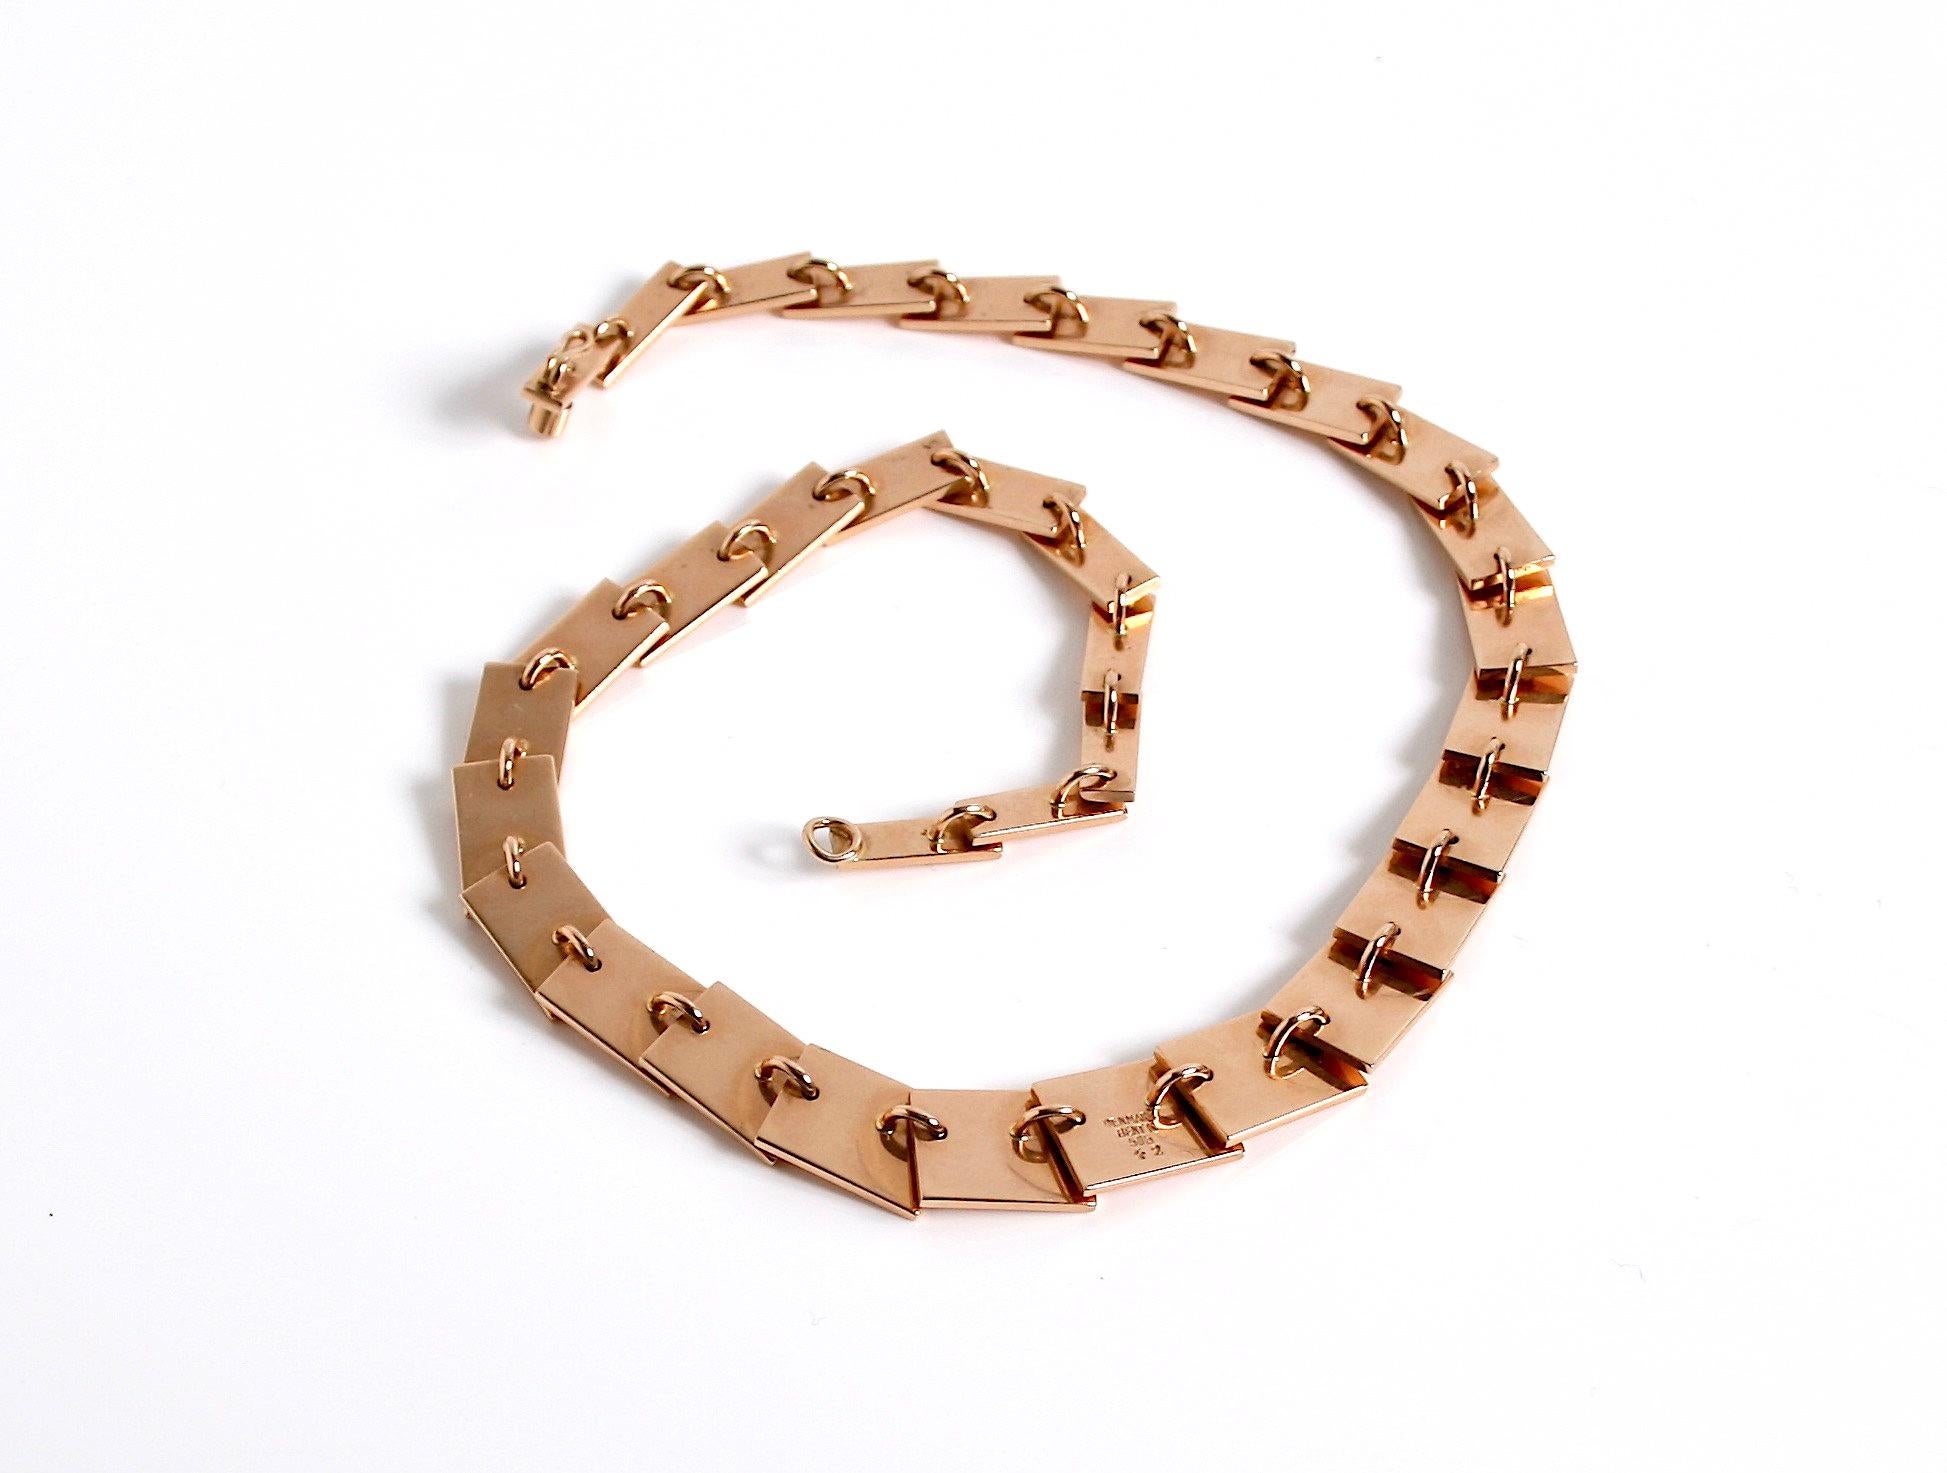  14k Gold Necklace designed by Bent Knudsen Denmark In Good Condition For Sale In London, GB